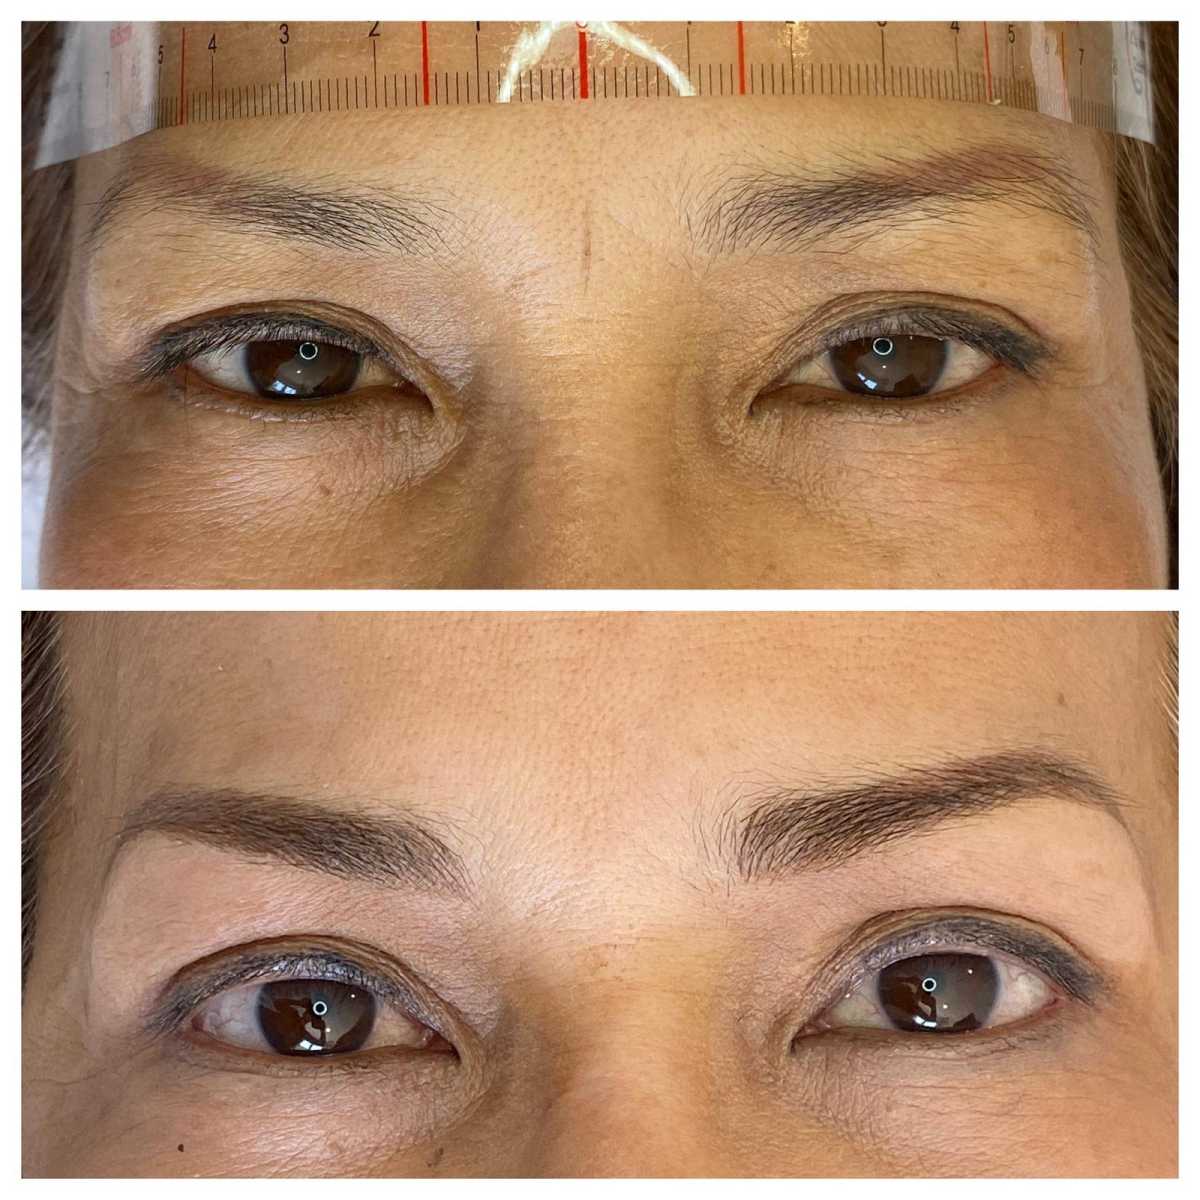 Procedures of Doing Microblading Tattoo